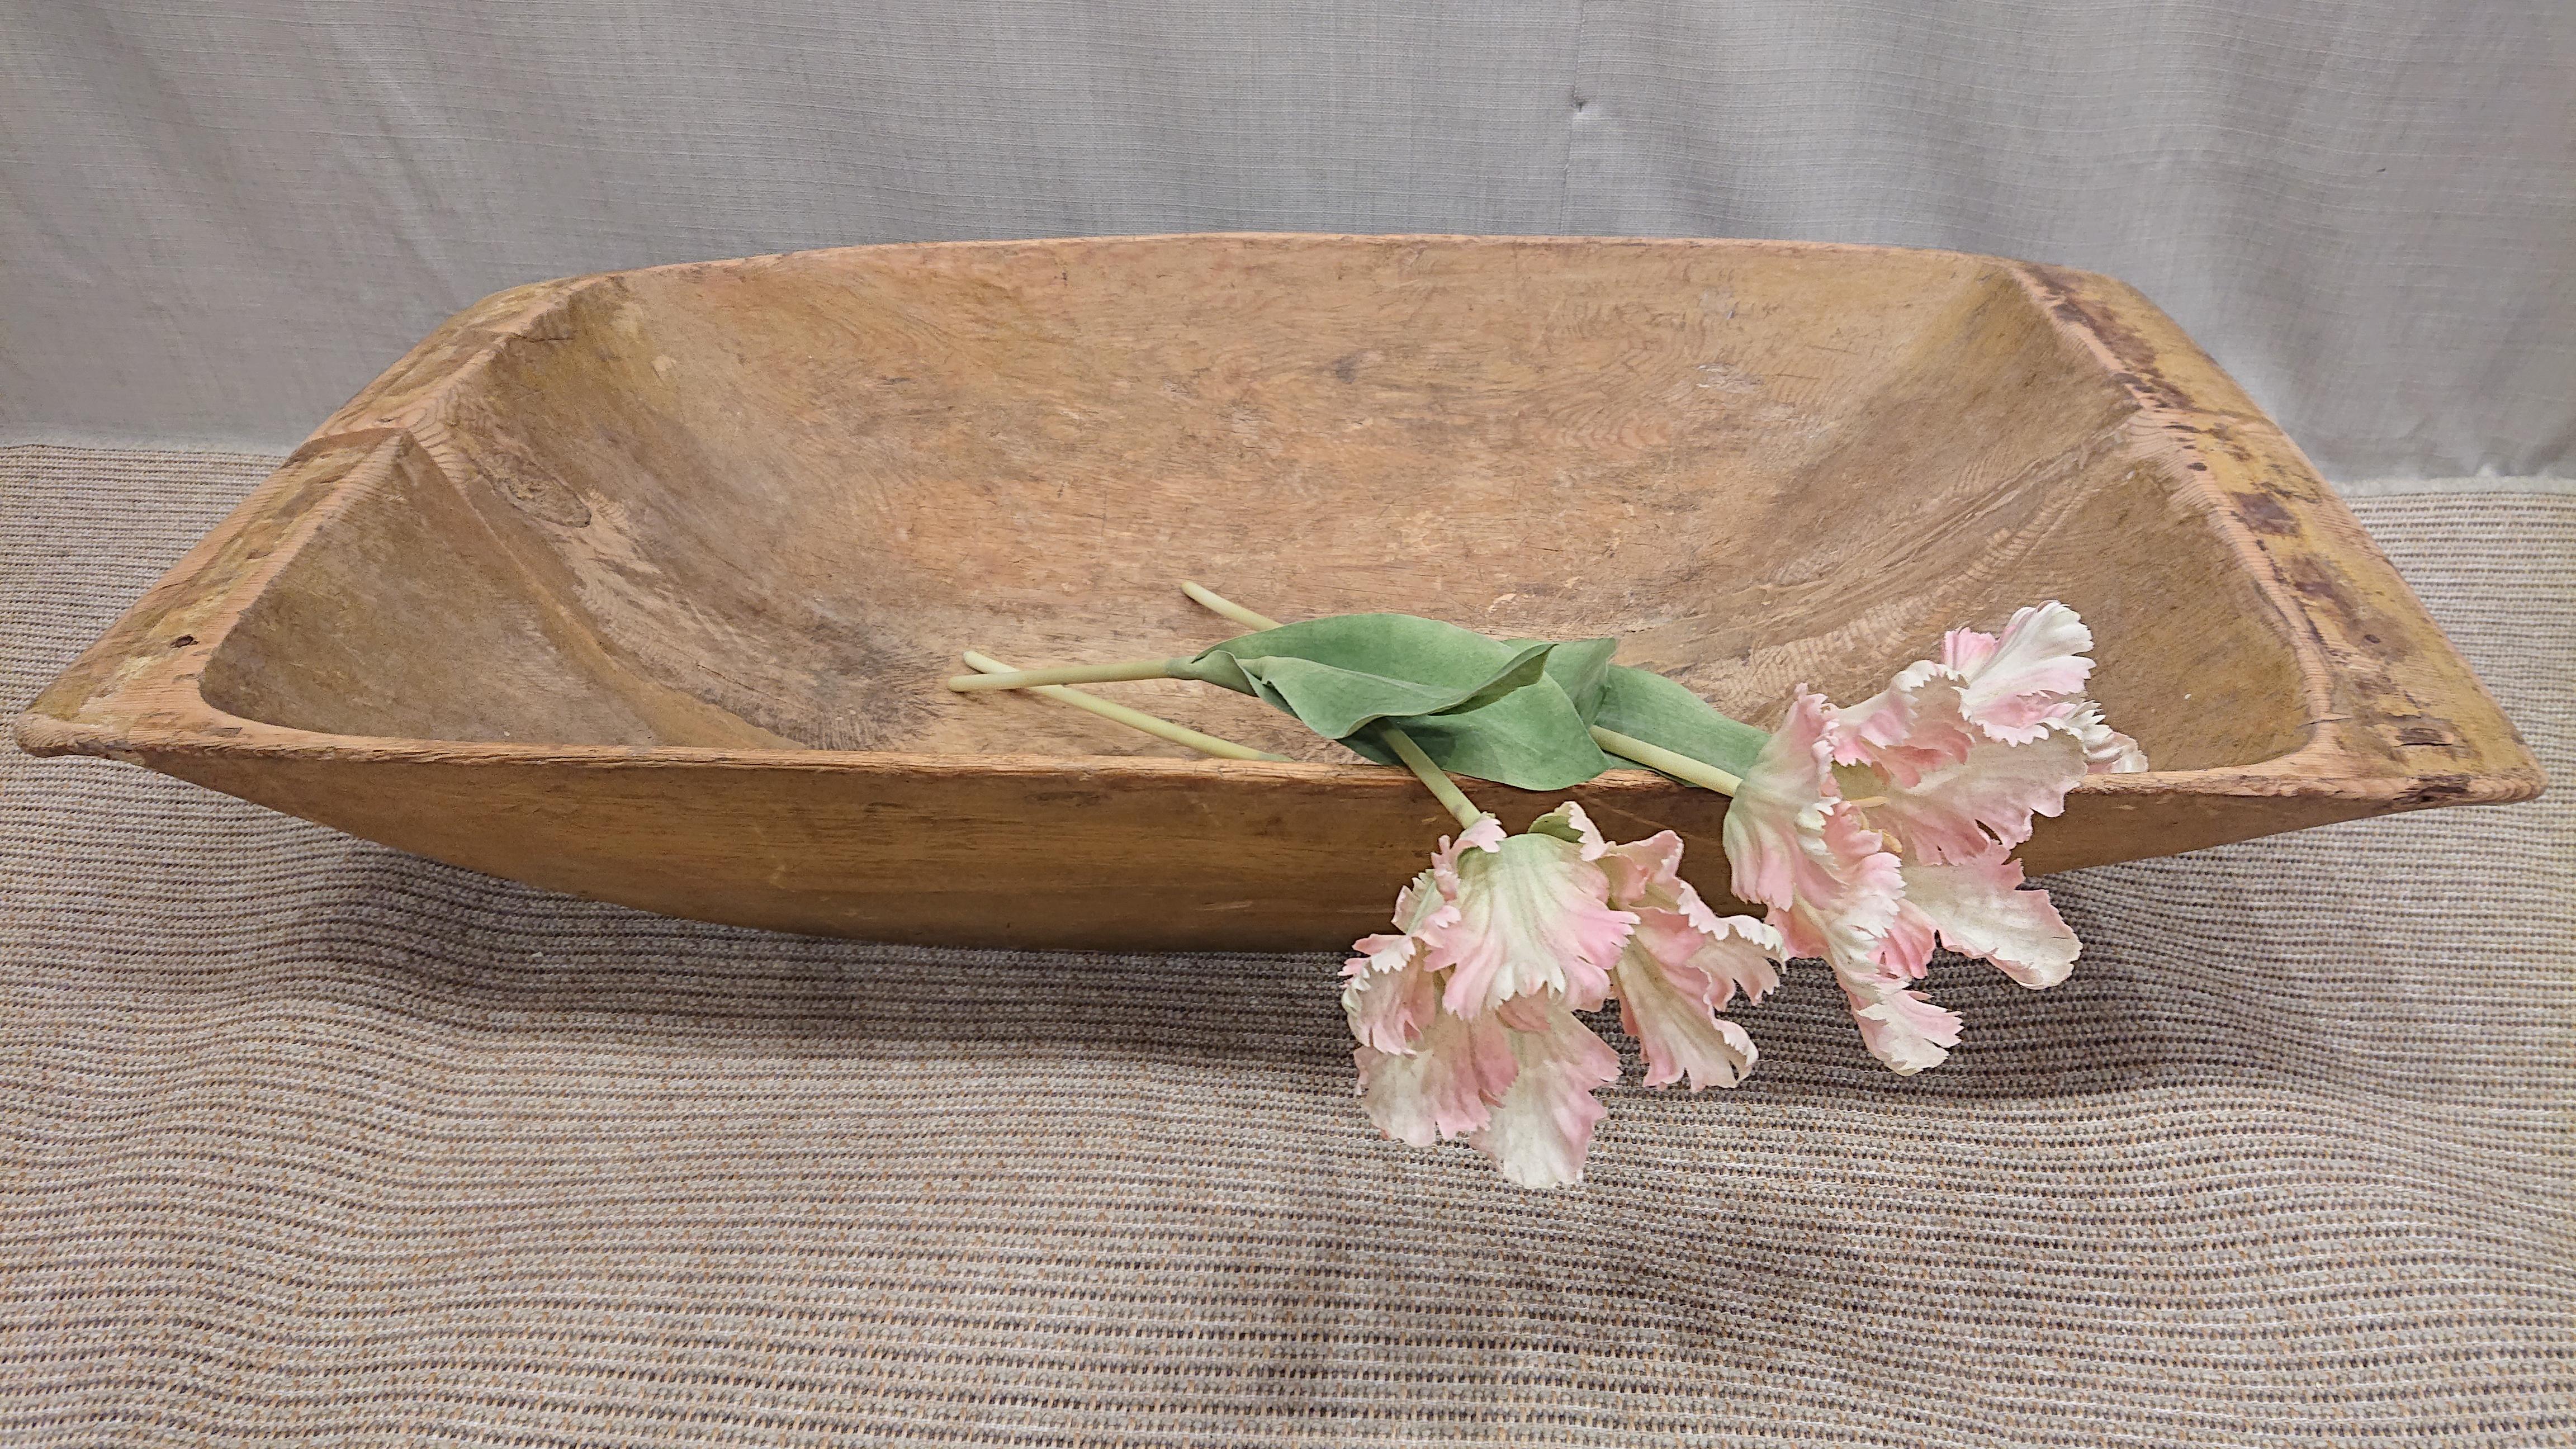 19th Century Swedish Folk Art Tray / Serving bowl from Boden Norrbotten ,Northern Sweden .
A large farmers handcrafted tray or serving bowl or centerpiece.
In solid pine wood.
A highly functional object with a sculptural apperance.
Repaired